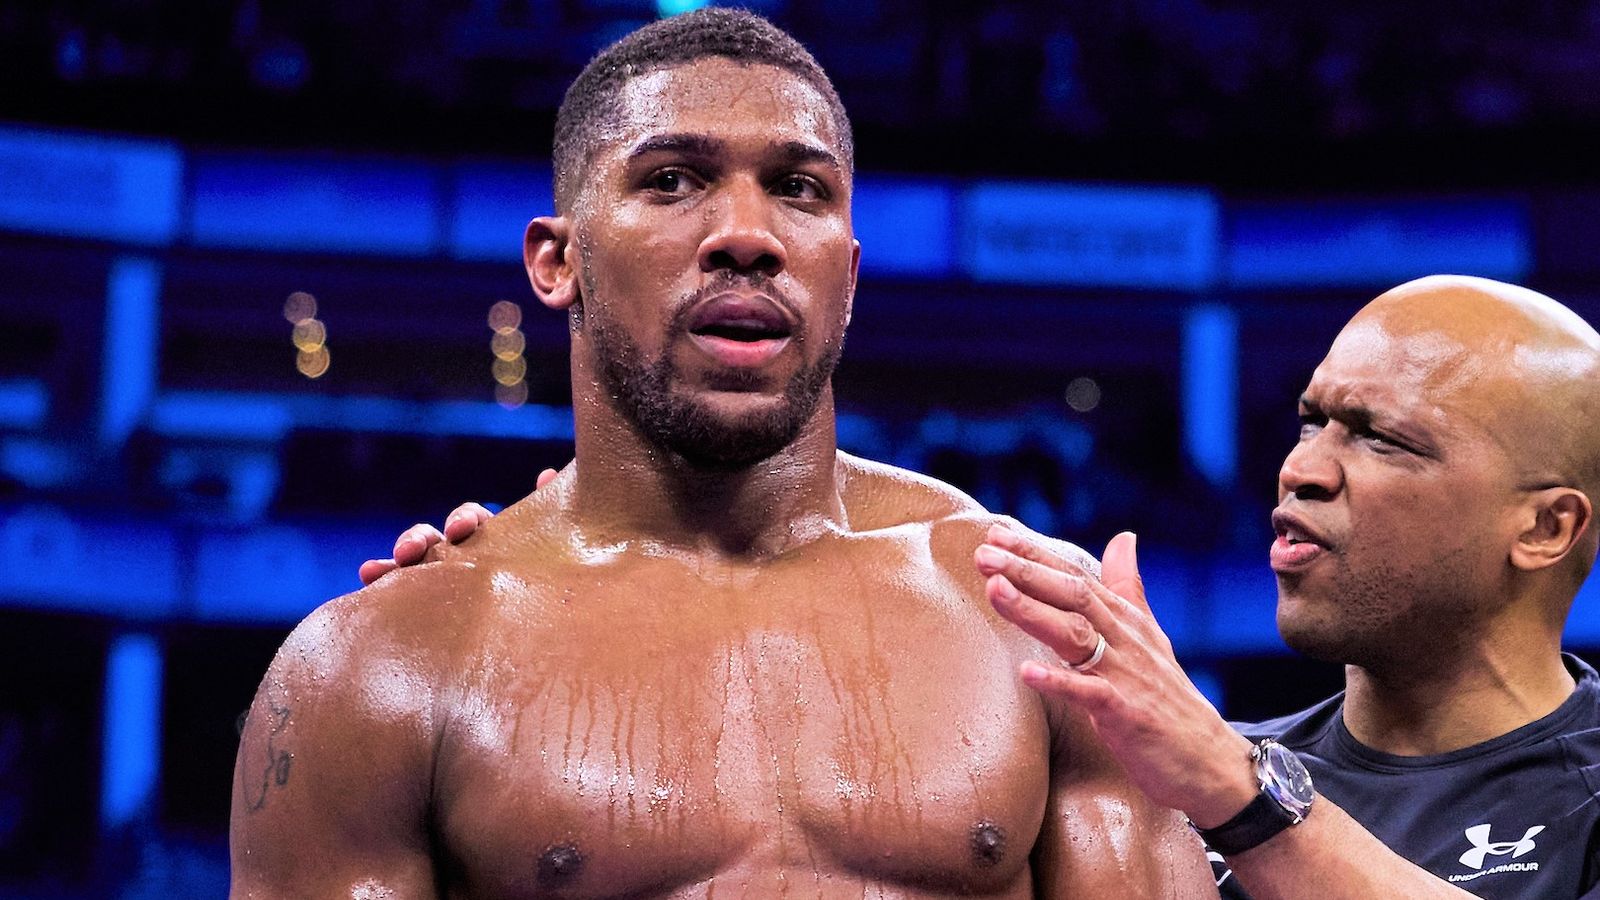 Anthony Joshua showed 'vulnerability' against Jermaine Franklin, says Johnny Nelson | Boxing News